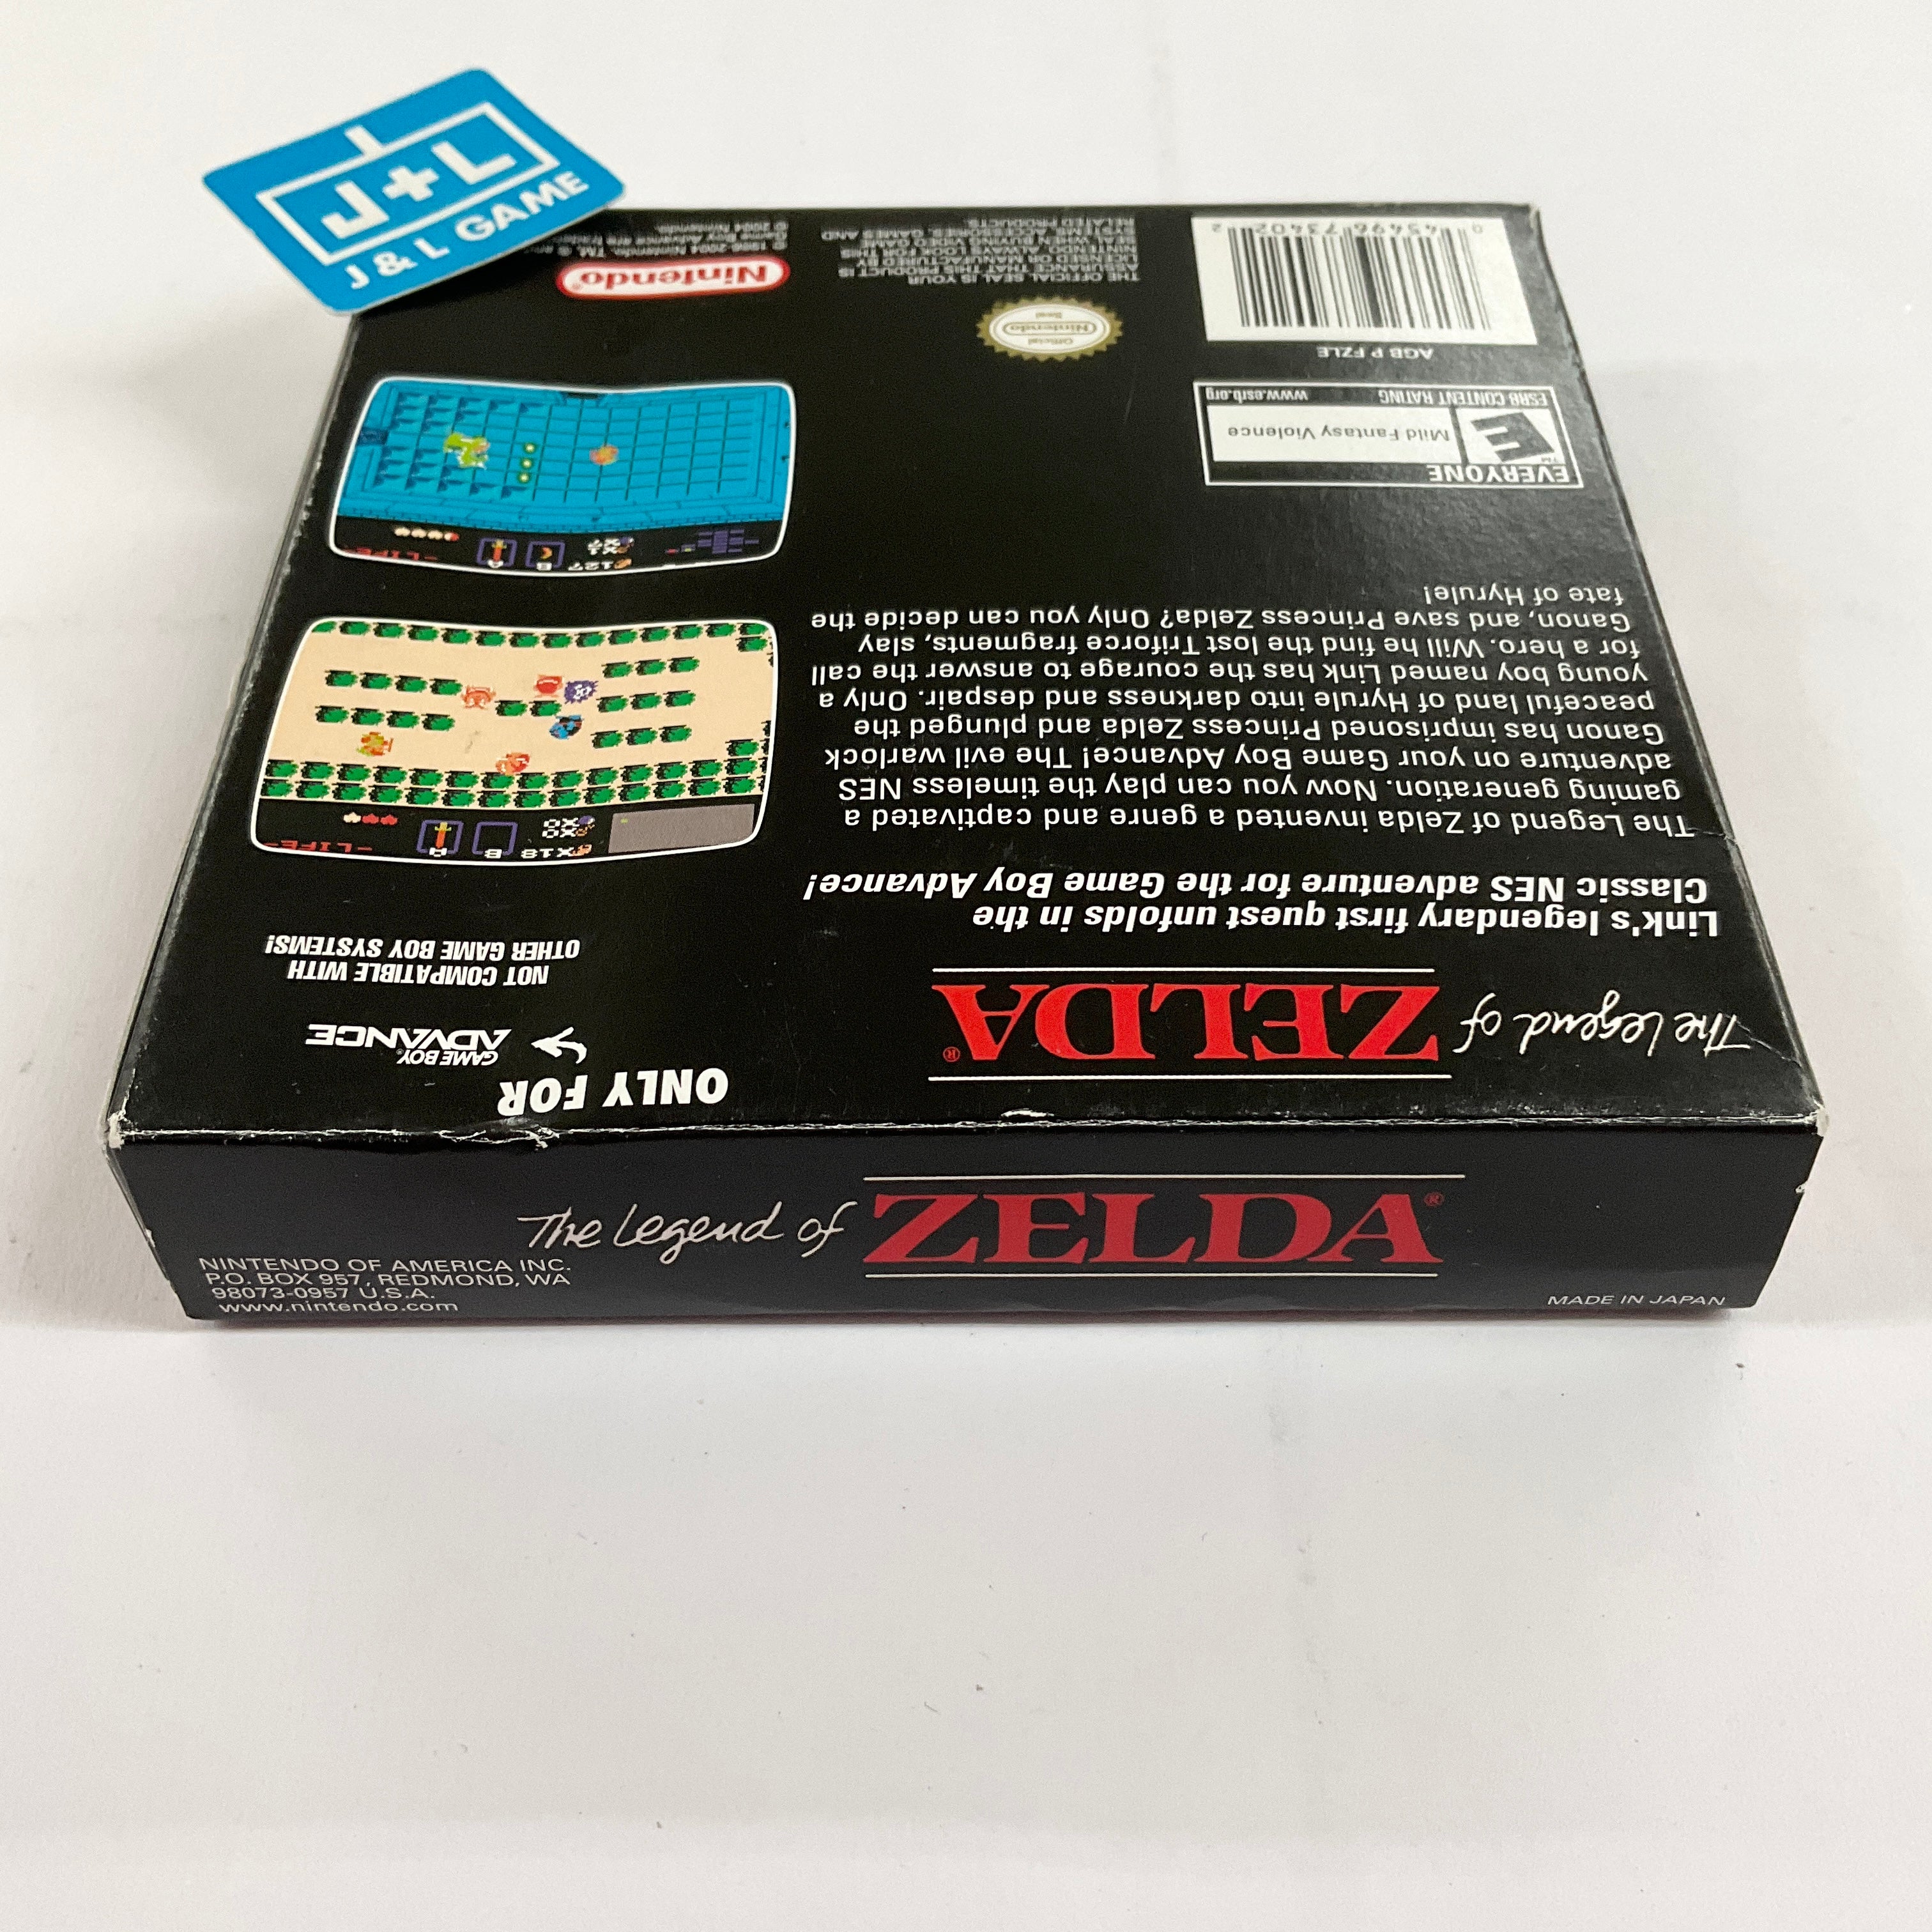 Classic NES Series: The Legend of Zelda - (GBA) Game Boy Advance [Pre-Owned] Video Games Nintendo   